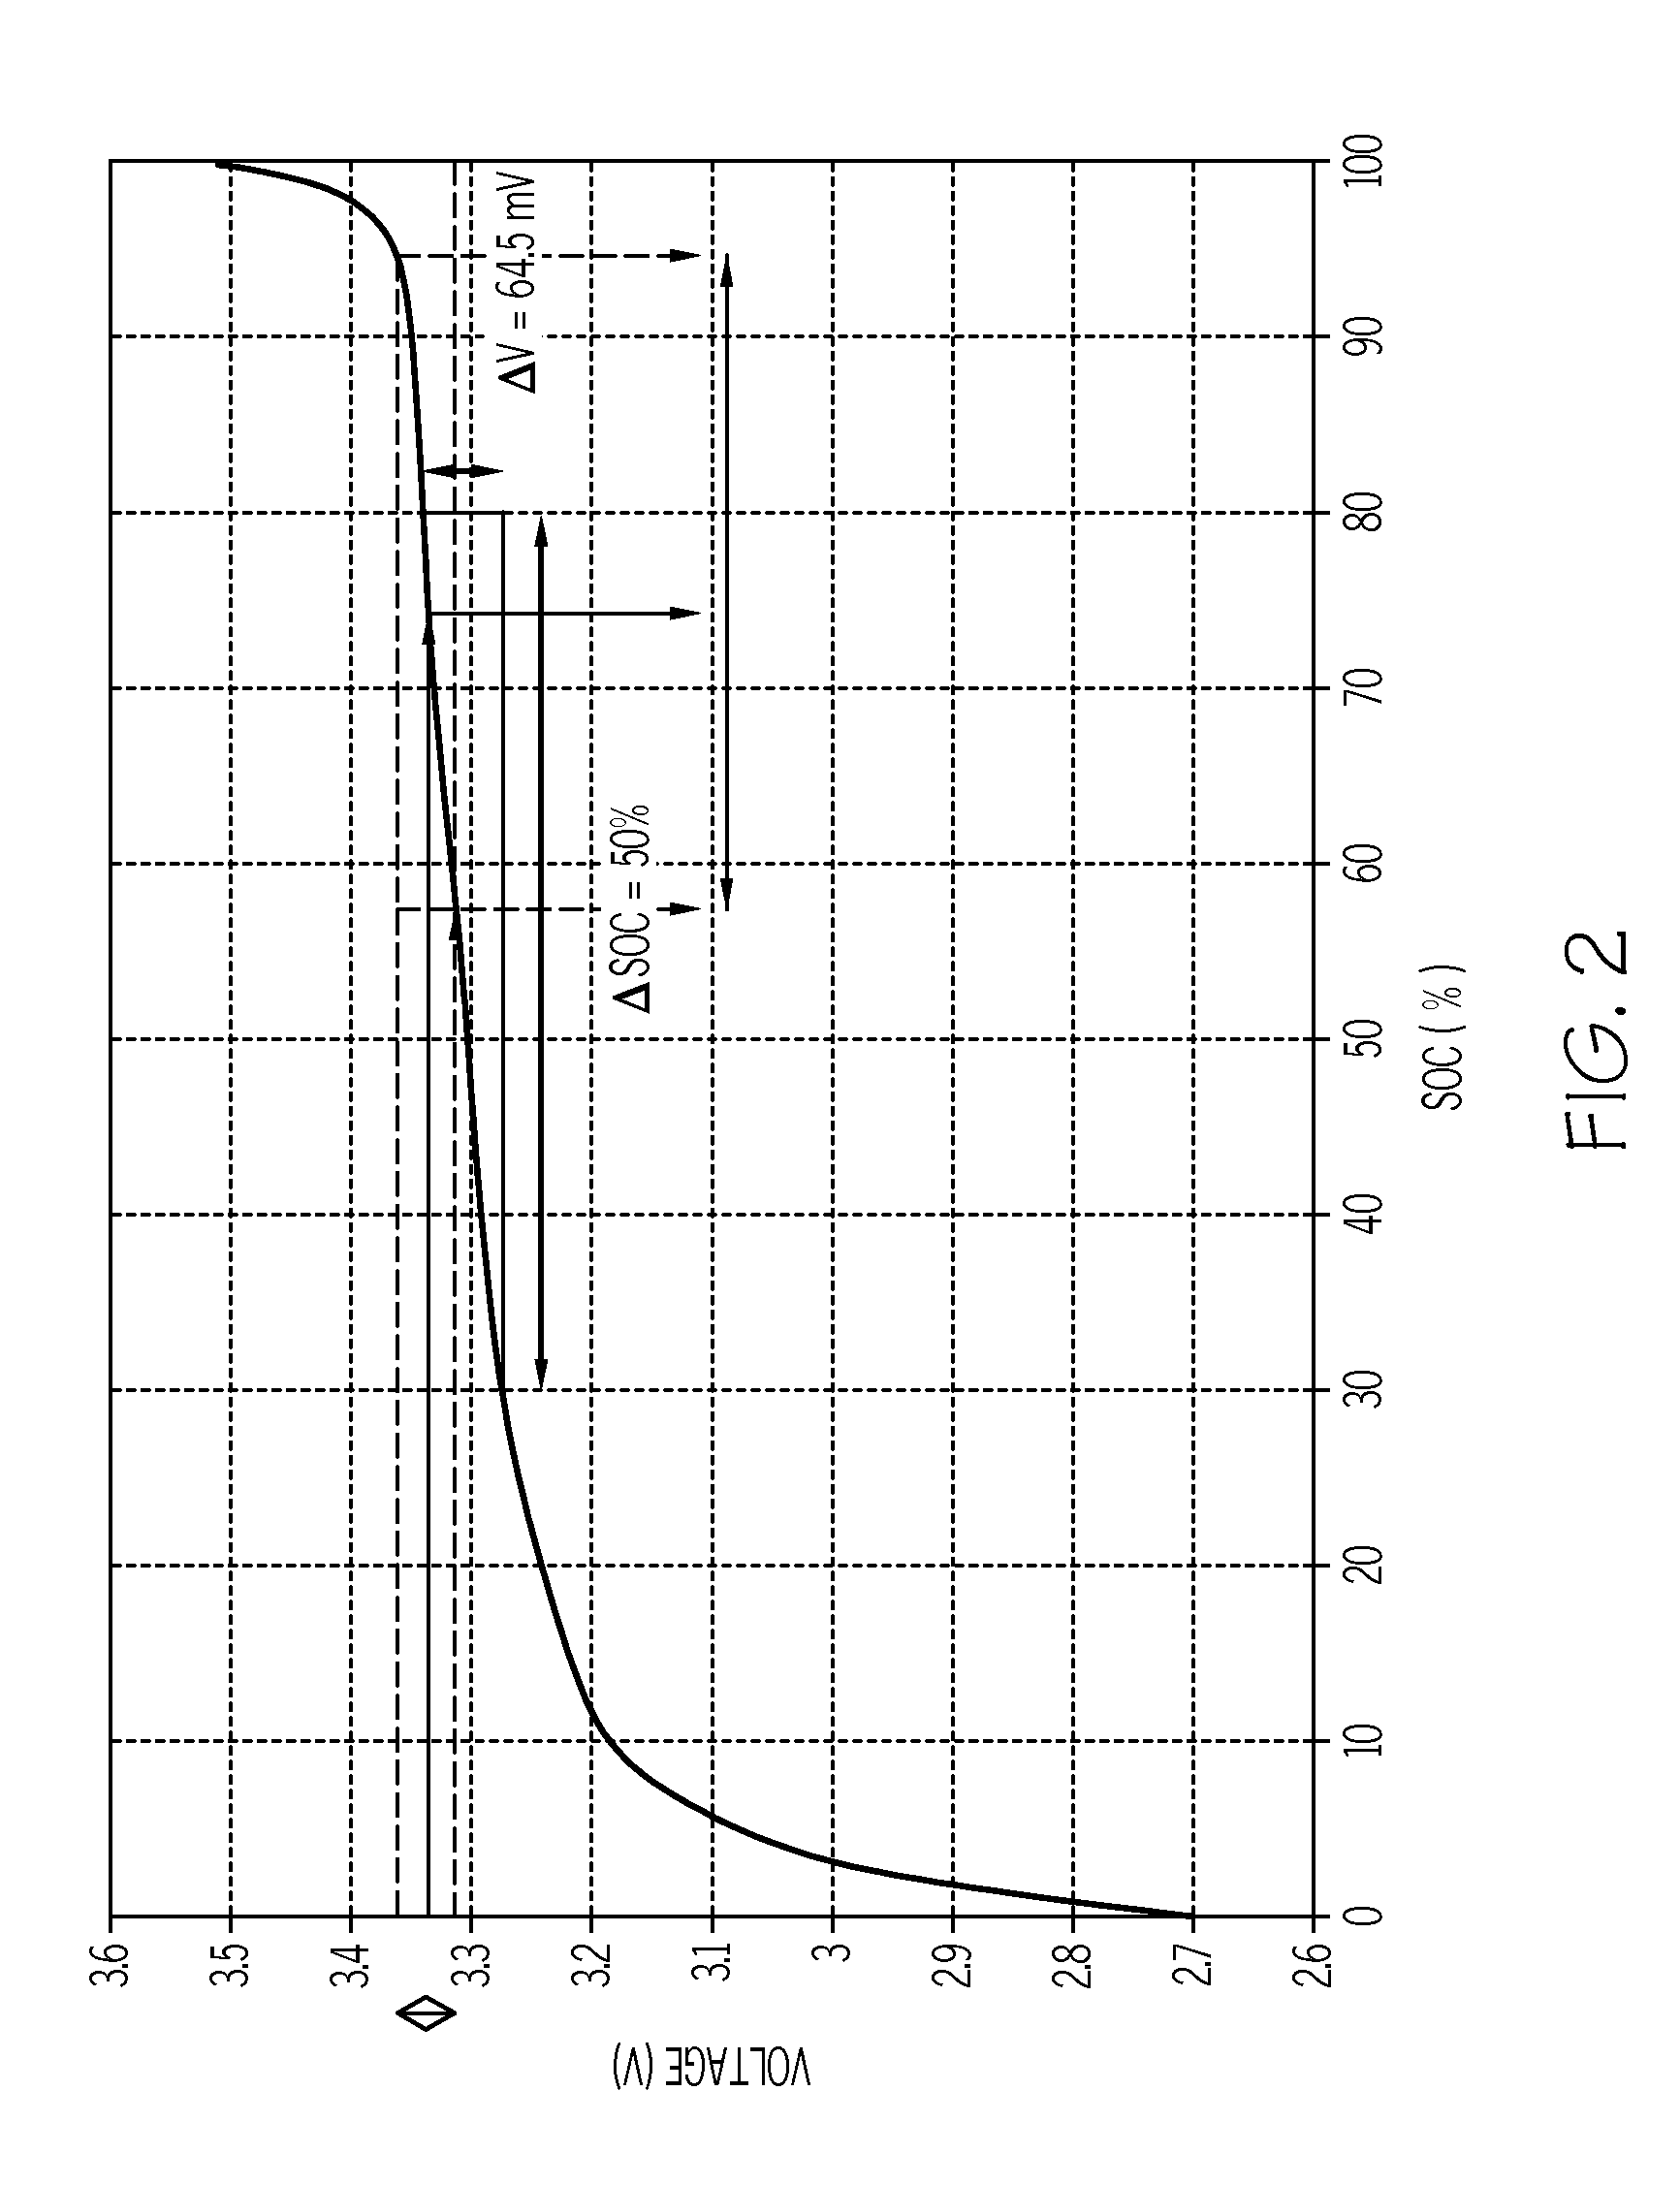 Systems and methods for determining cell capacity values in a multi-cell battery